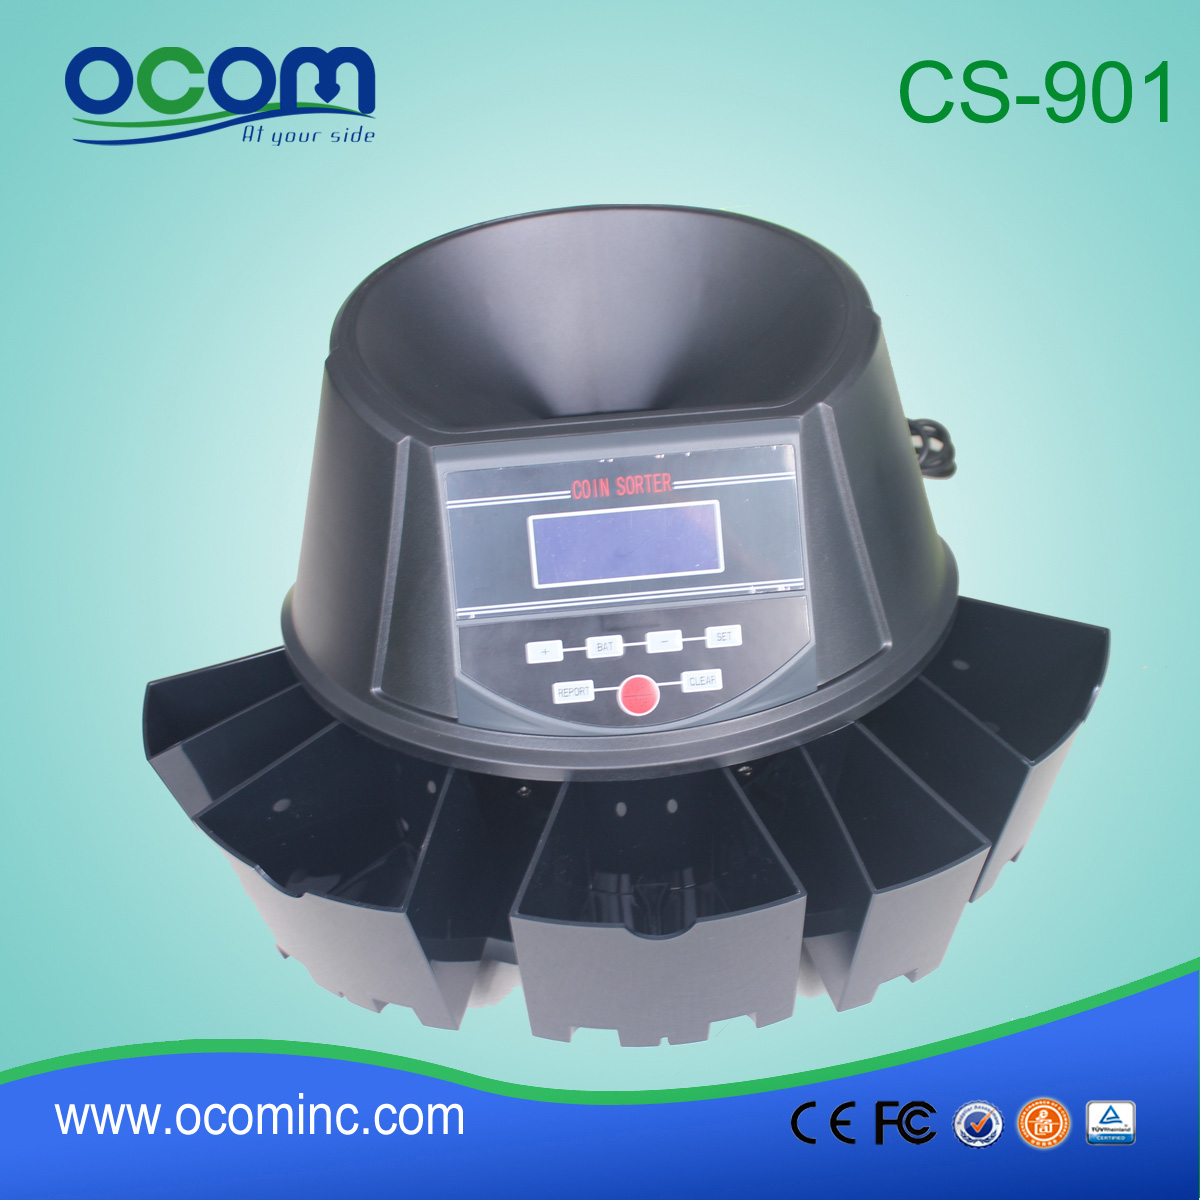 CS901 Automatic Fast Sort Mix Coins Counter Coin Sorter